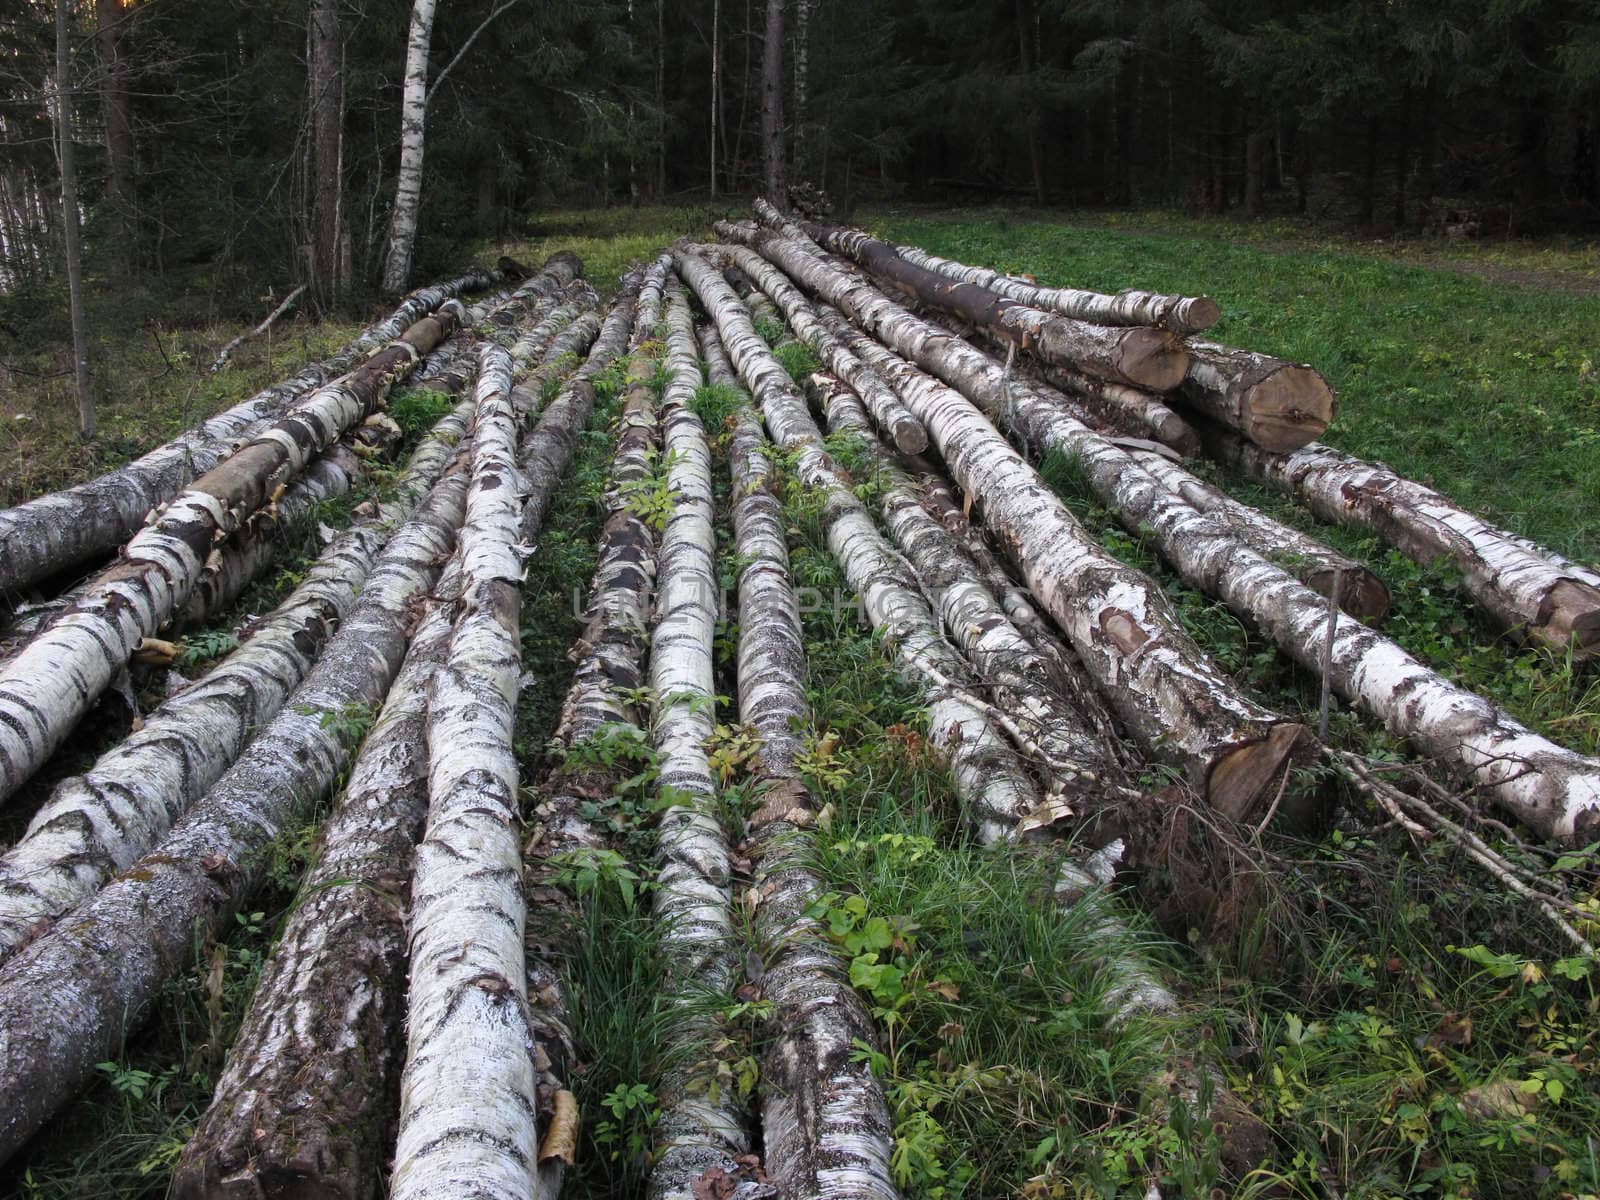 Pile of birch logs in the forest by wander